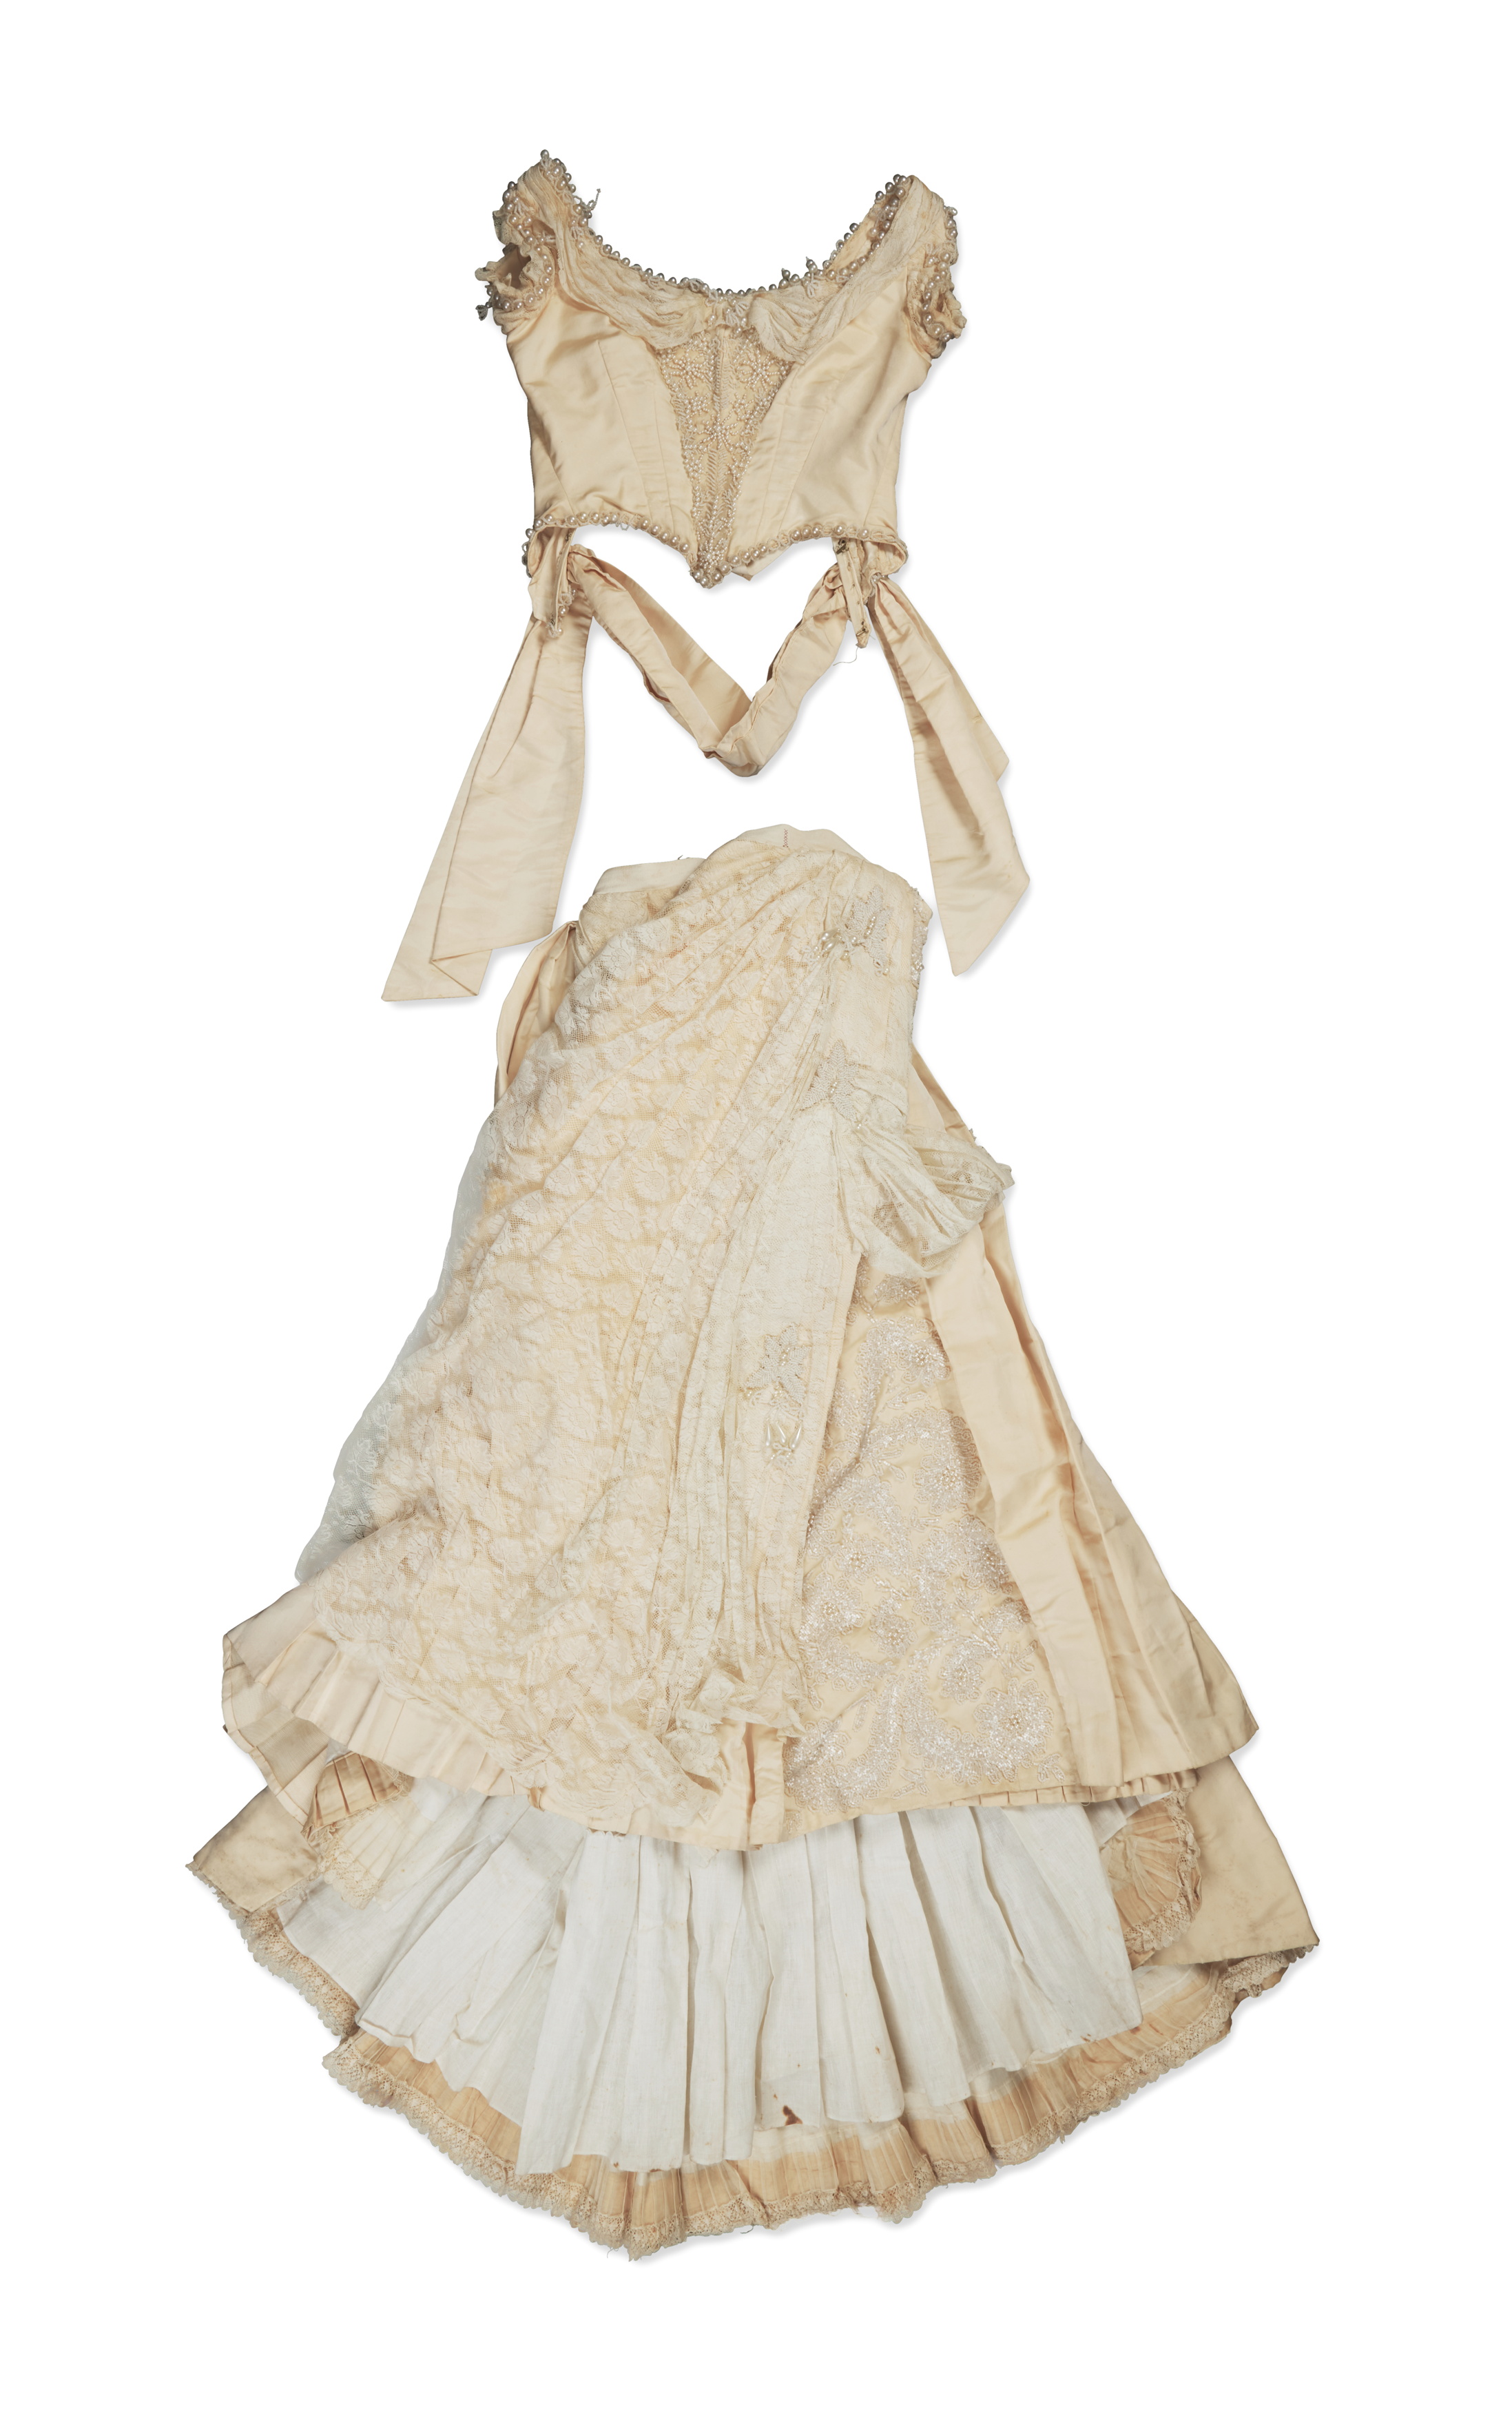 Womens wedding outfit worn by Emma Oghiltree